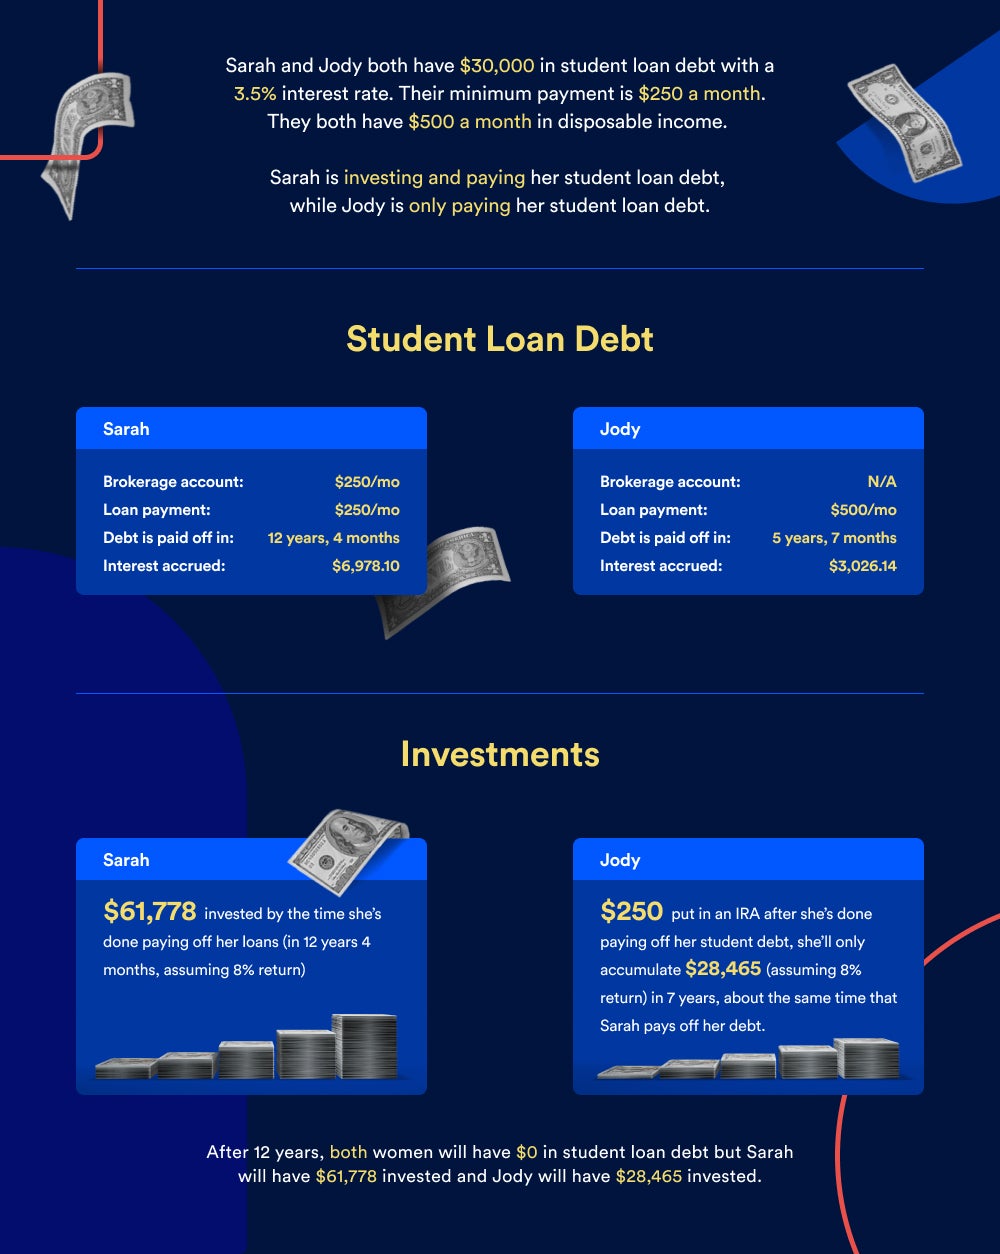 Info graphic comparing two individuals with student loan debt and investments